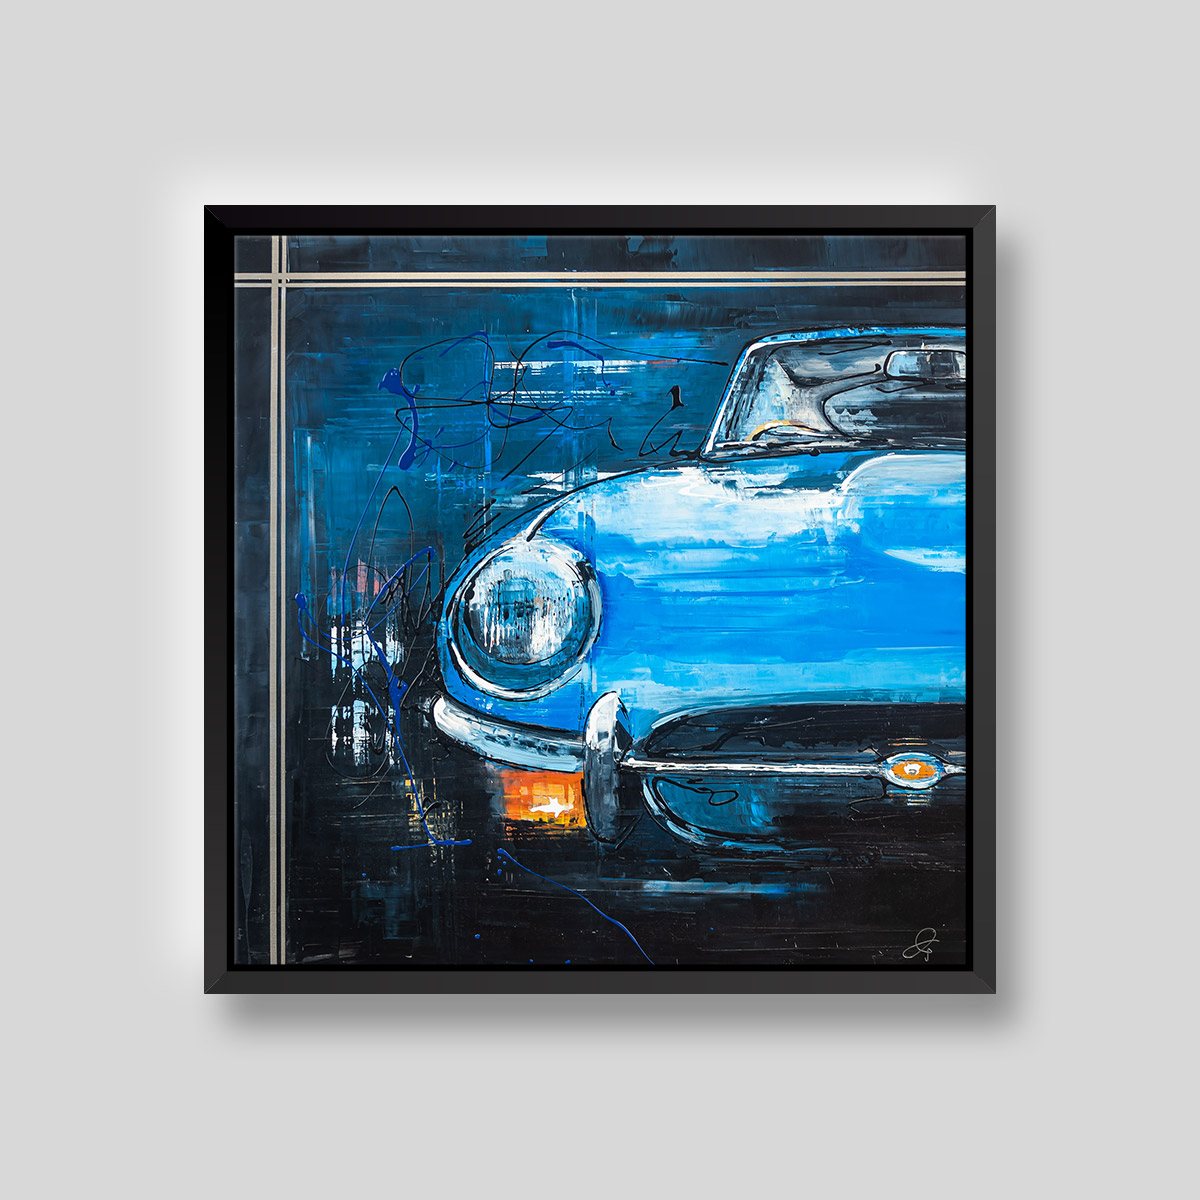 Blue Beauty by Paul Kenton, UK Contemporary artist, an E-Type Jaguar painting from his Motorsports collection